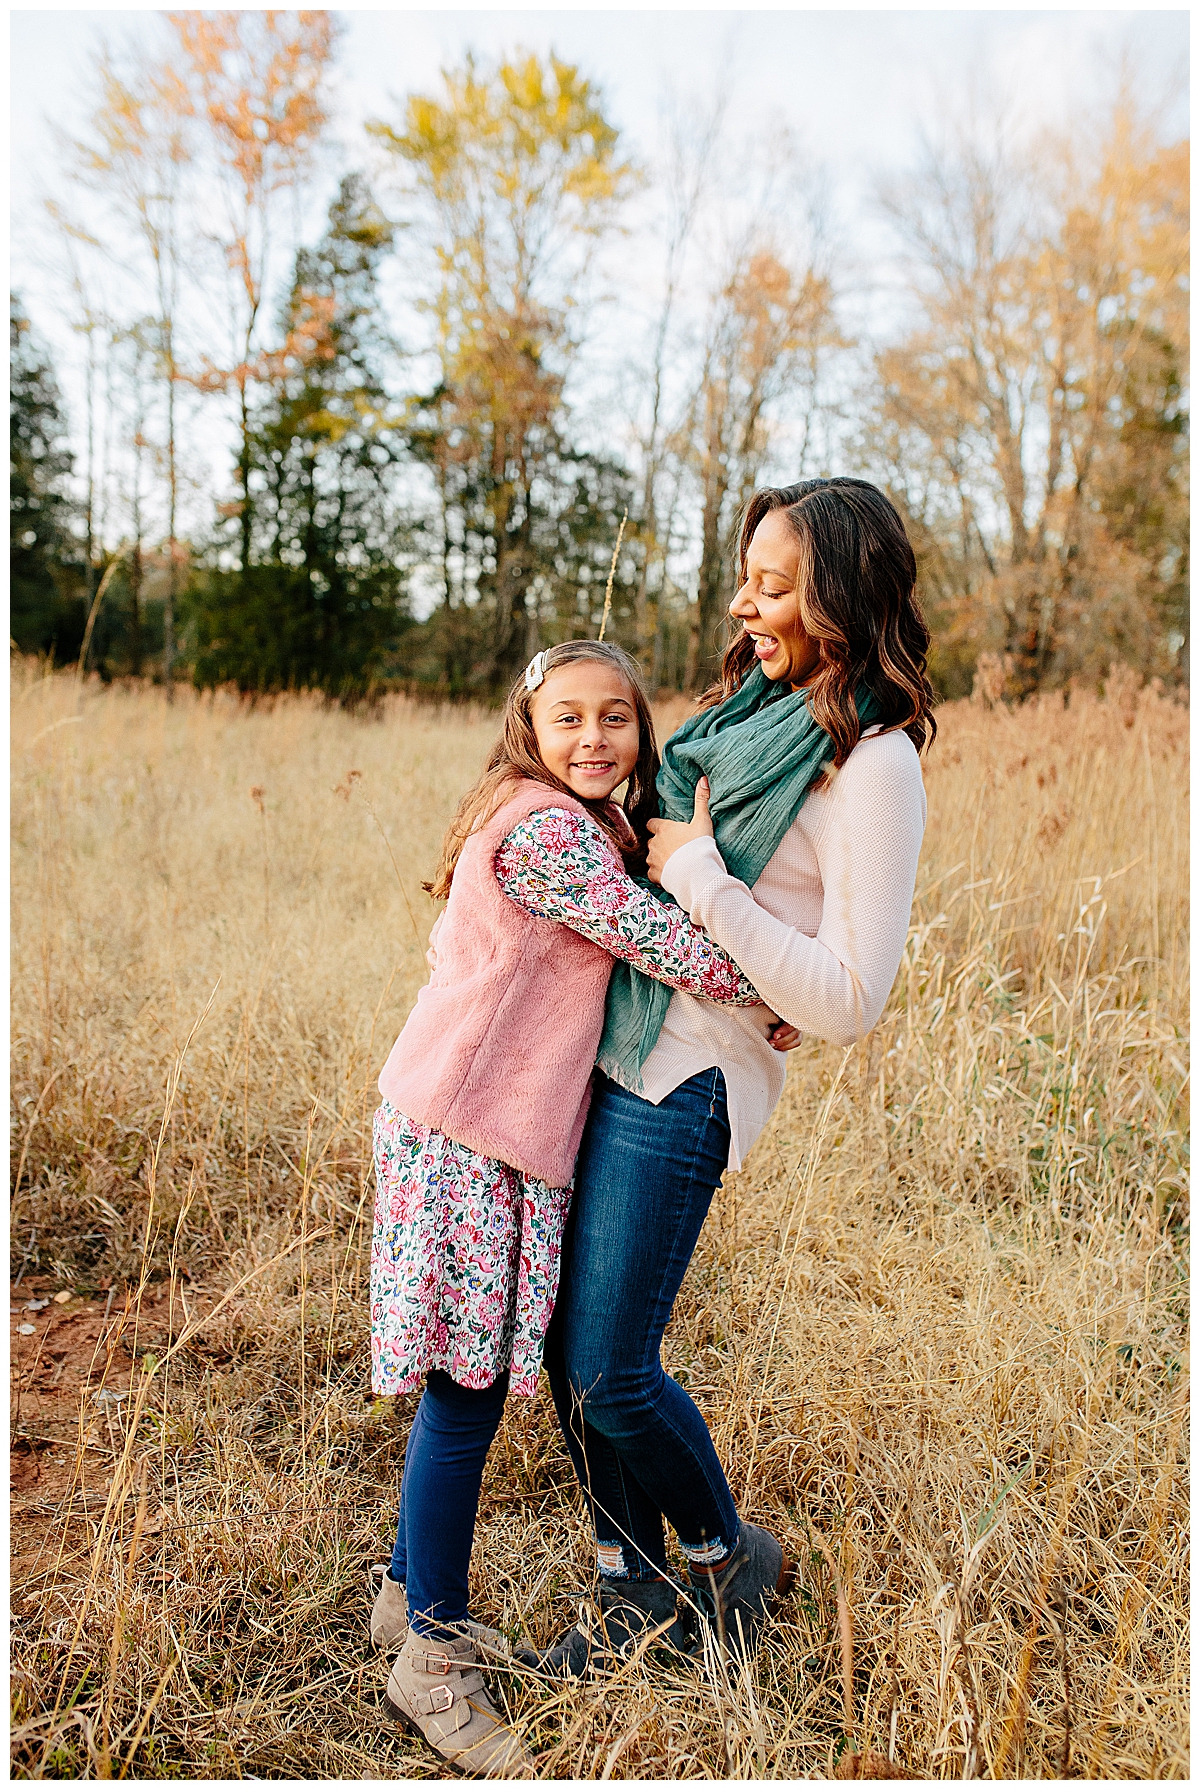 The Burns Family fall portrait session at the Manassas Battlefield with Seana Shuchart Photography